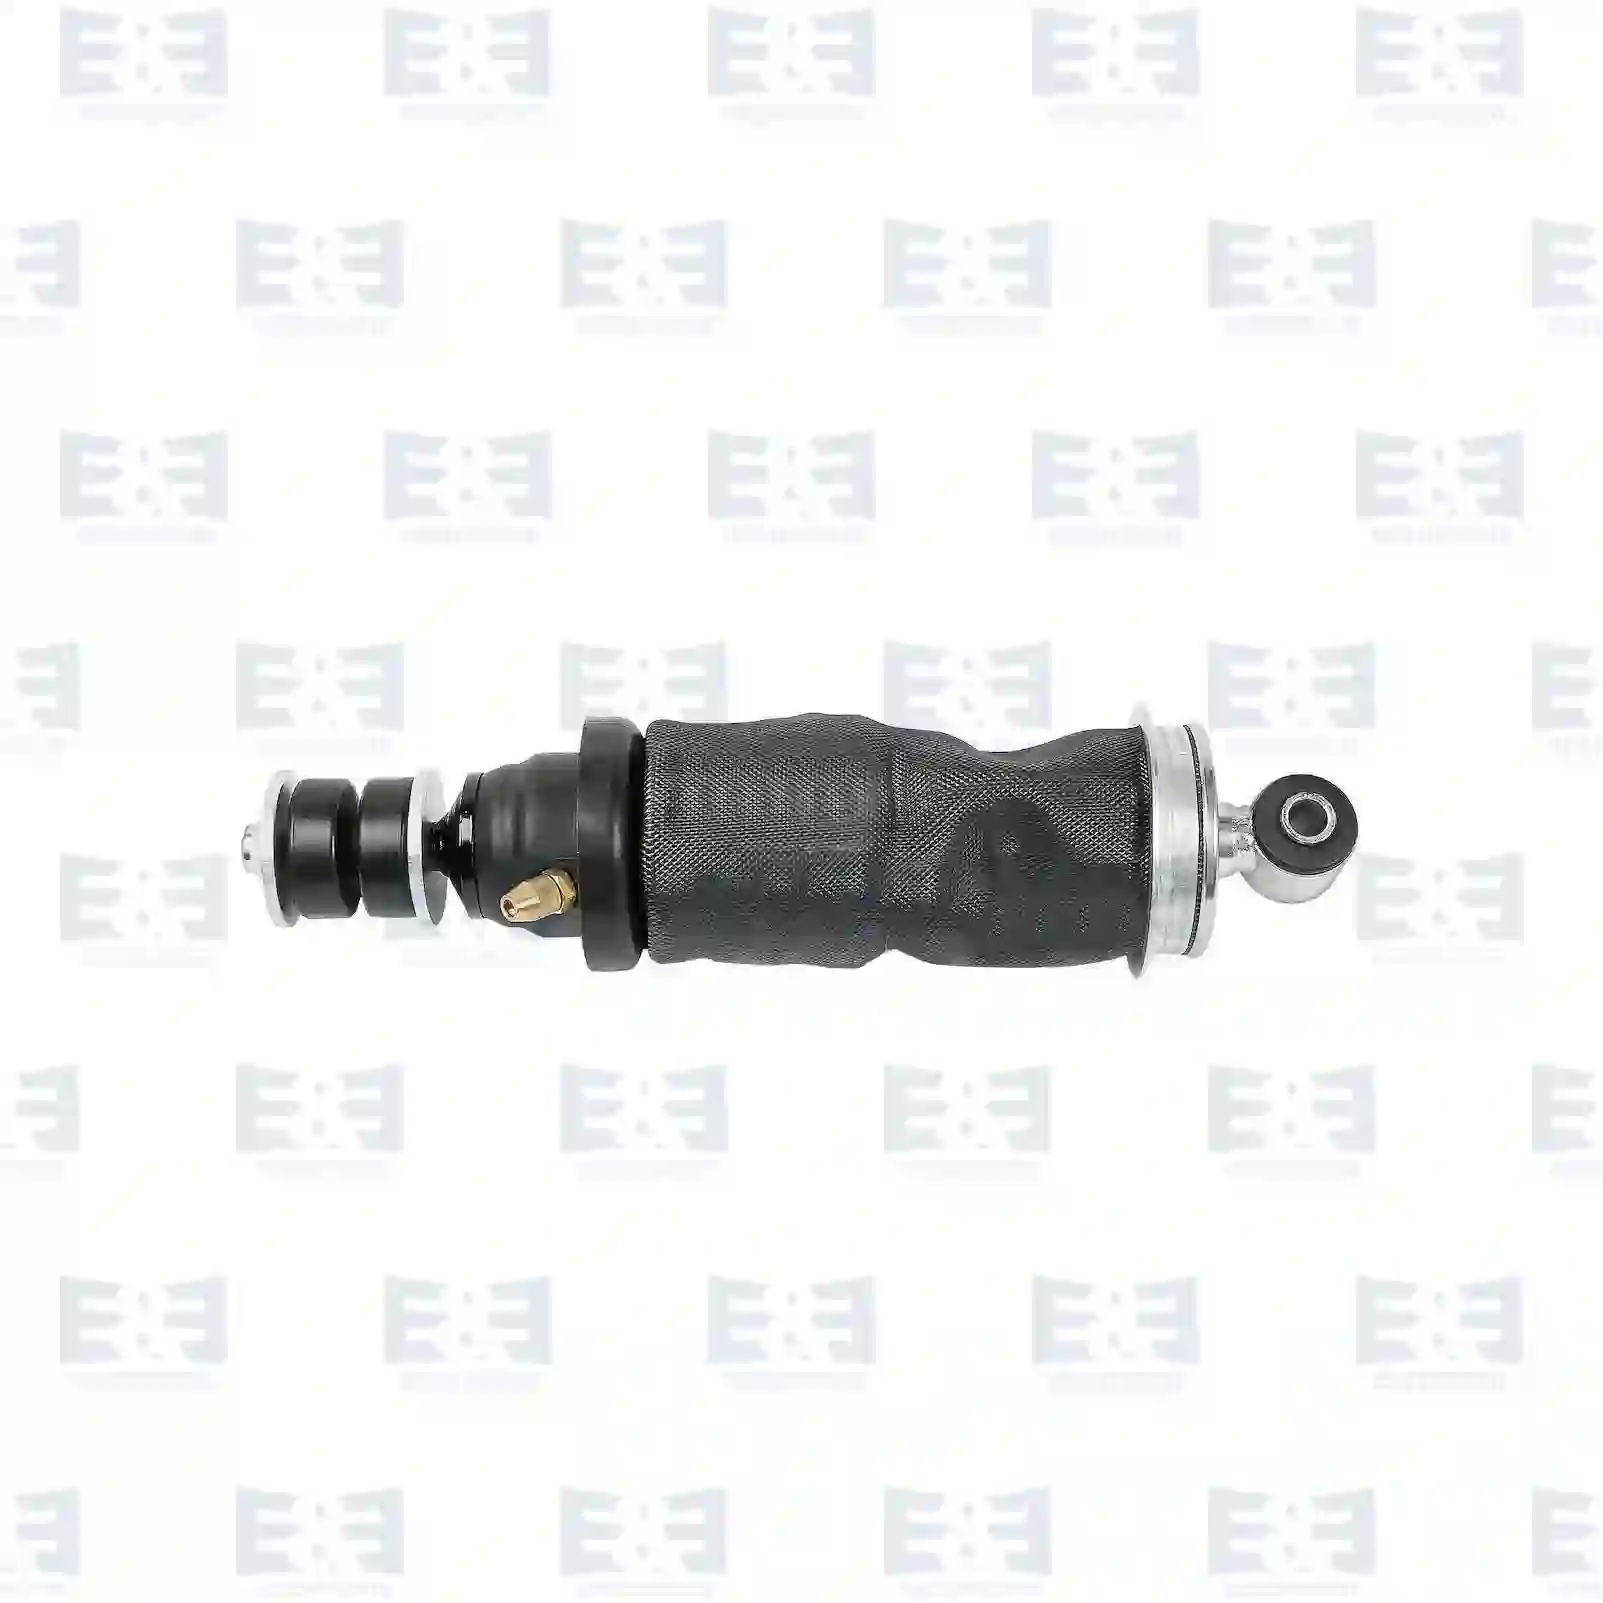 Cabin shock absorber, with air bellow, 2E2276475, 81417226048, 81417226051, , , , ||  2E2276475 E&E Truck Spare Parts | Truck Spare Parts, Auotomotive Spare Parts Cabin shock absorber, with air bellow, 2E2276475, 81417226048, 81417226051, , , , ||  2E2276475 E&E Truck Spare Parts | Truck Spare Parts, Auotomotive Spare Parts